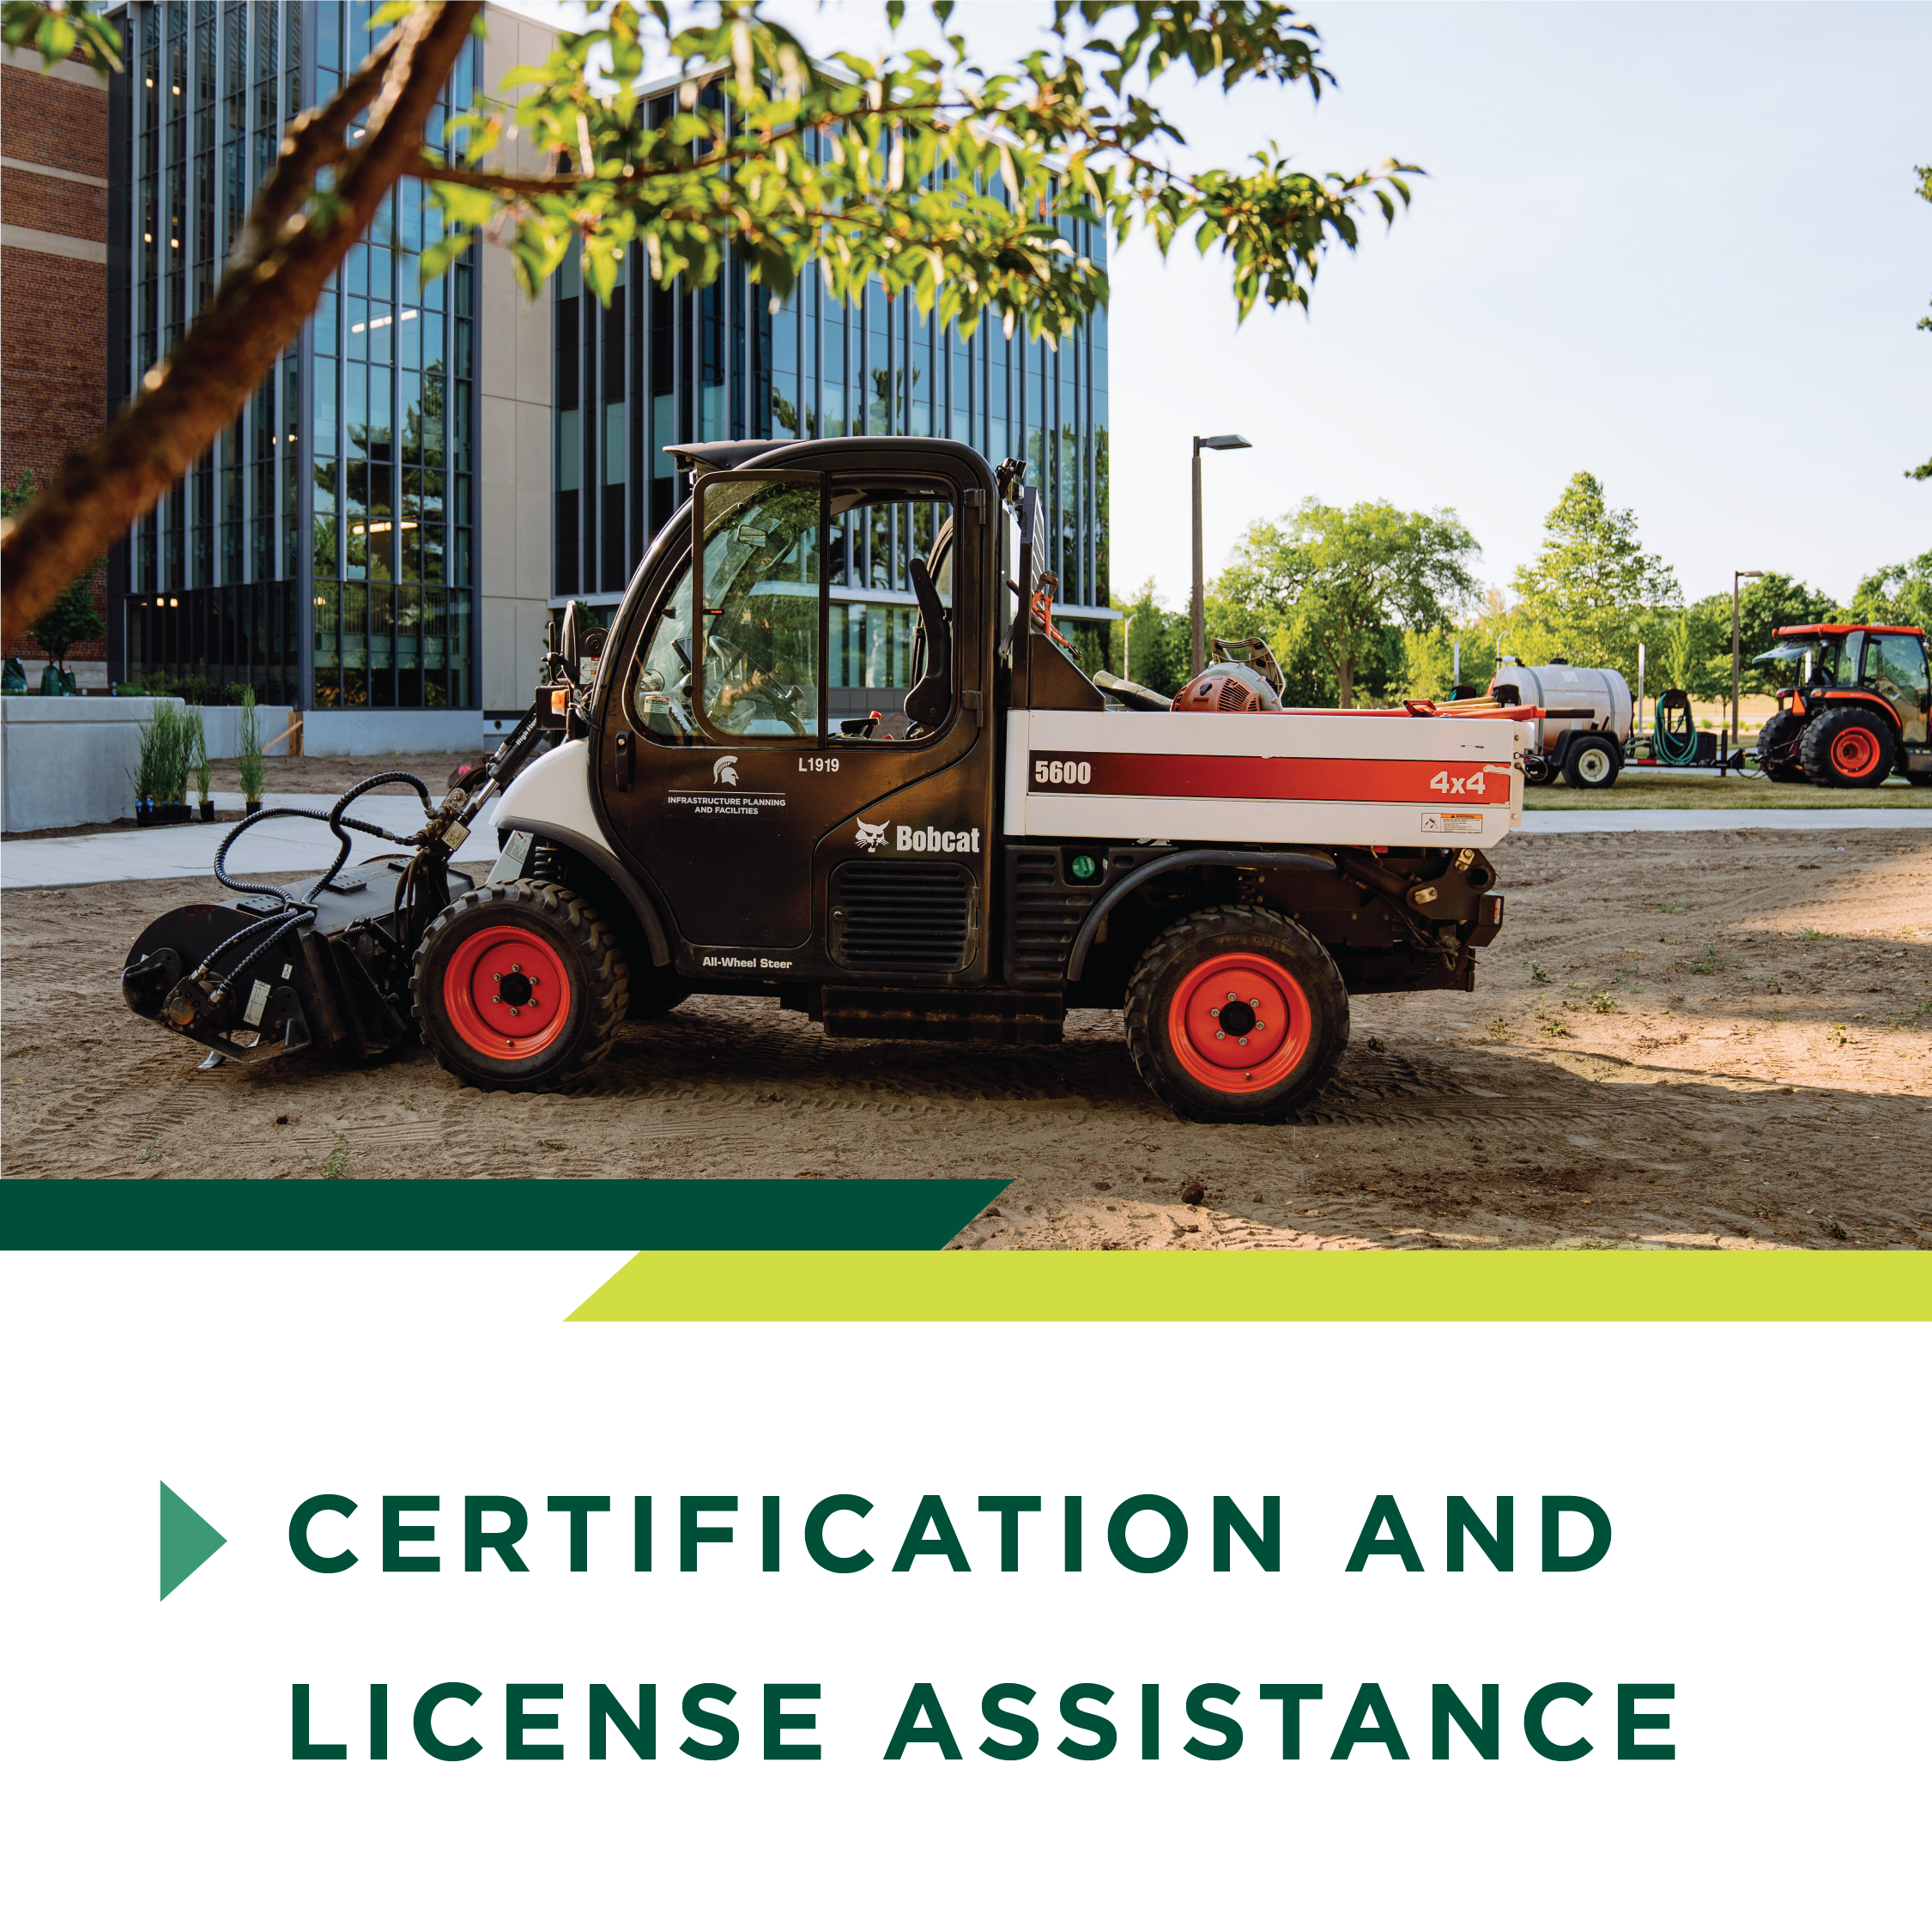 Certification and license assistance